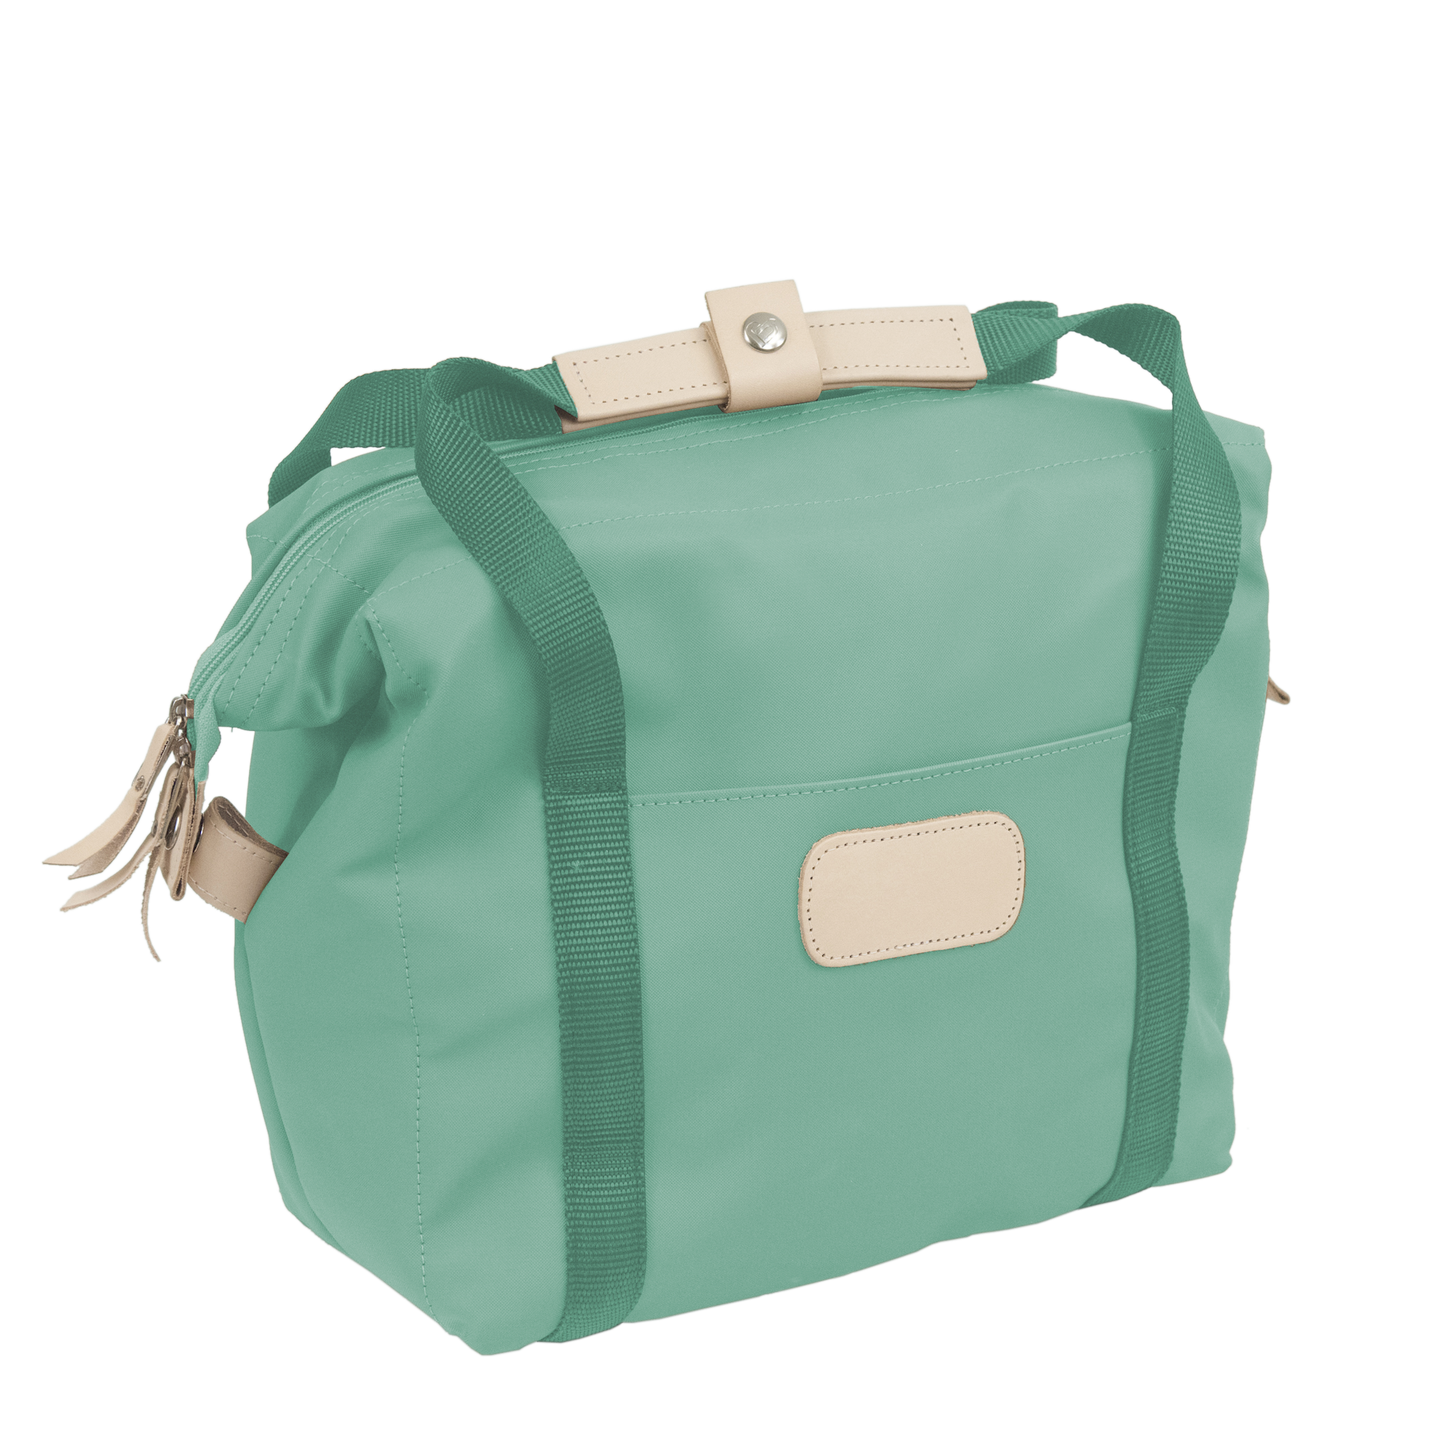 Cooler - Mint Coated Canvas Front Angle in Color 'Mint Coated Canvas'